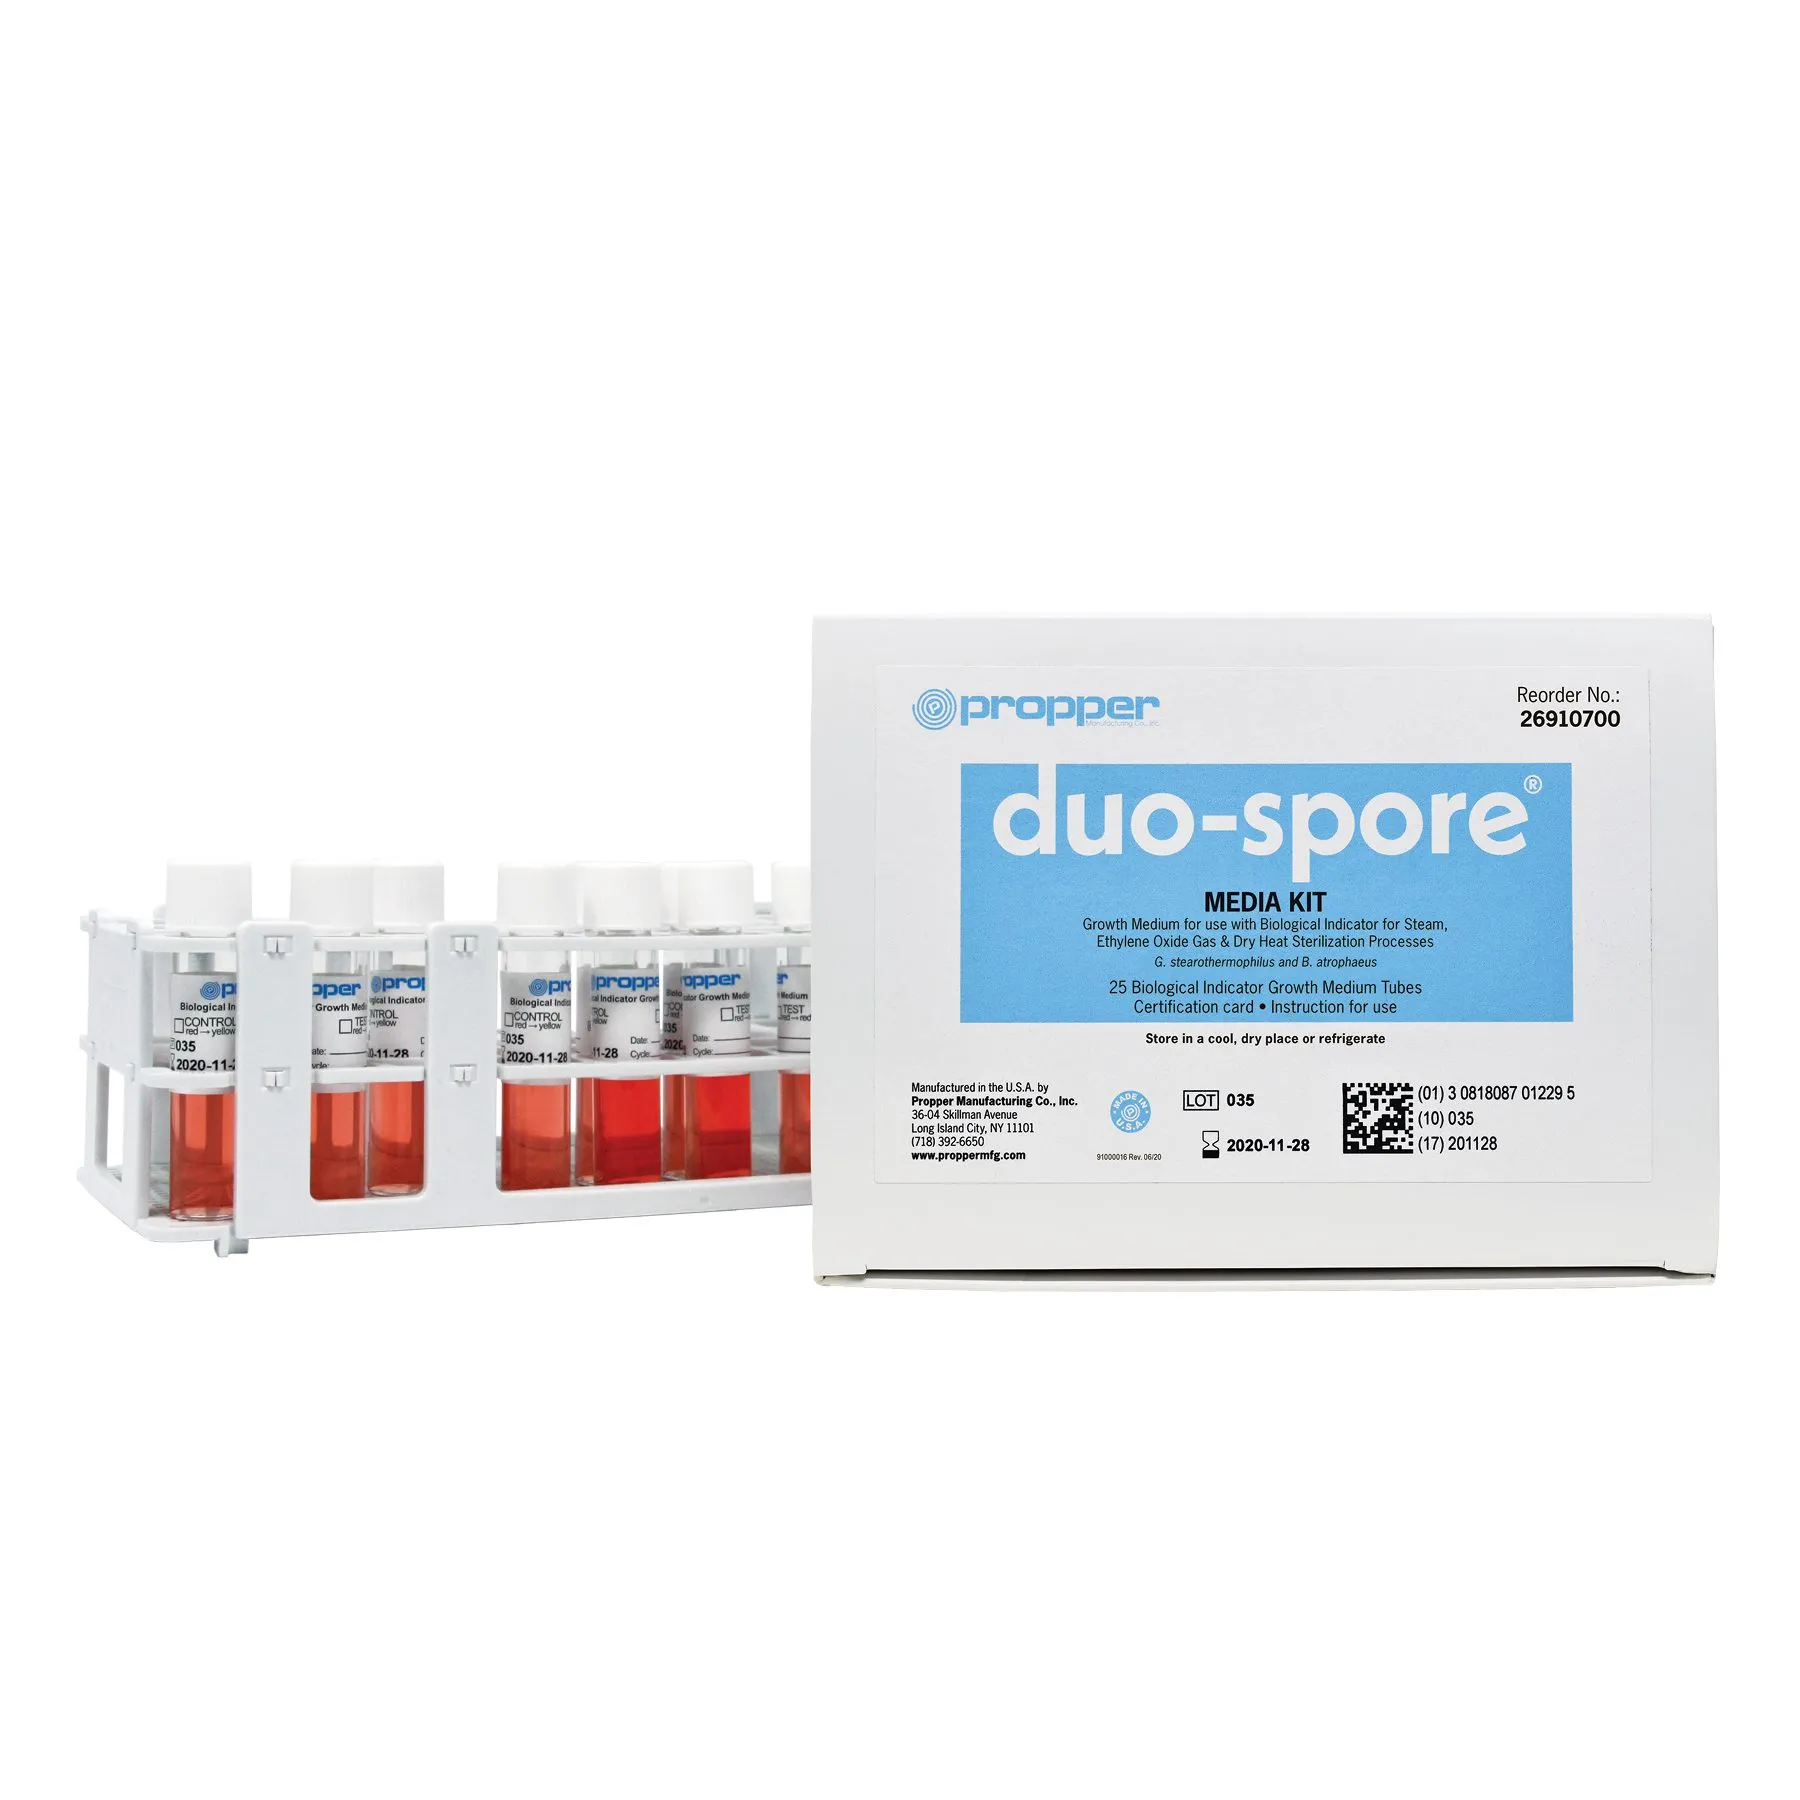 Propper - From: 26910700 To: 26910800 - Manufacturing Duo Spore Biological Indicator Growth Media Vials